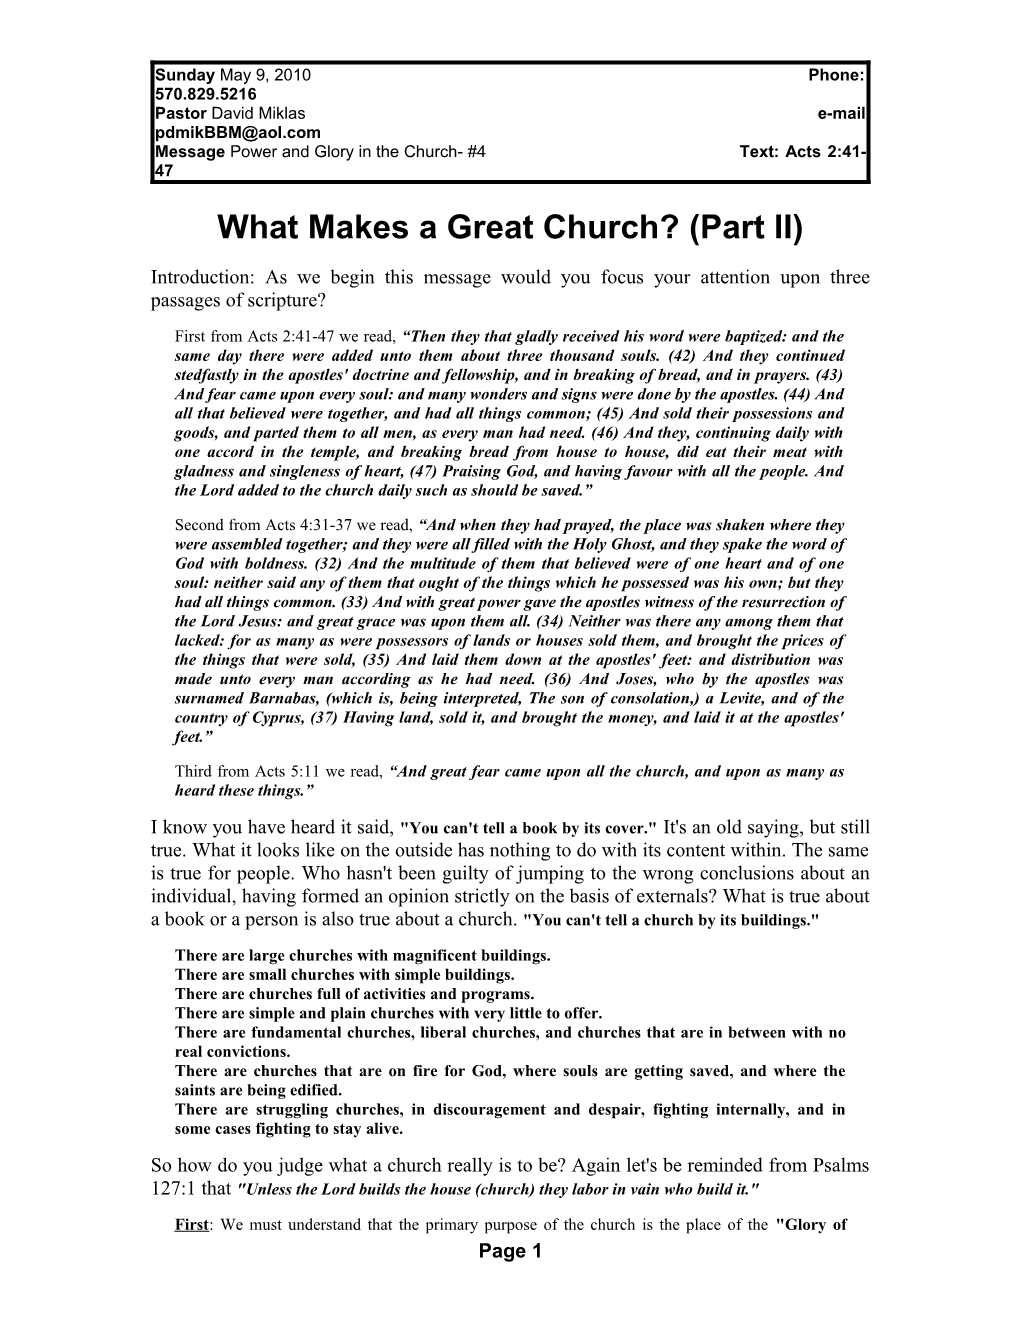 What Makes a Great Church ( Part II )